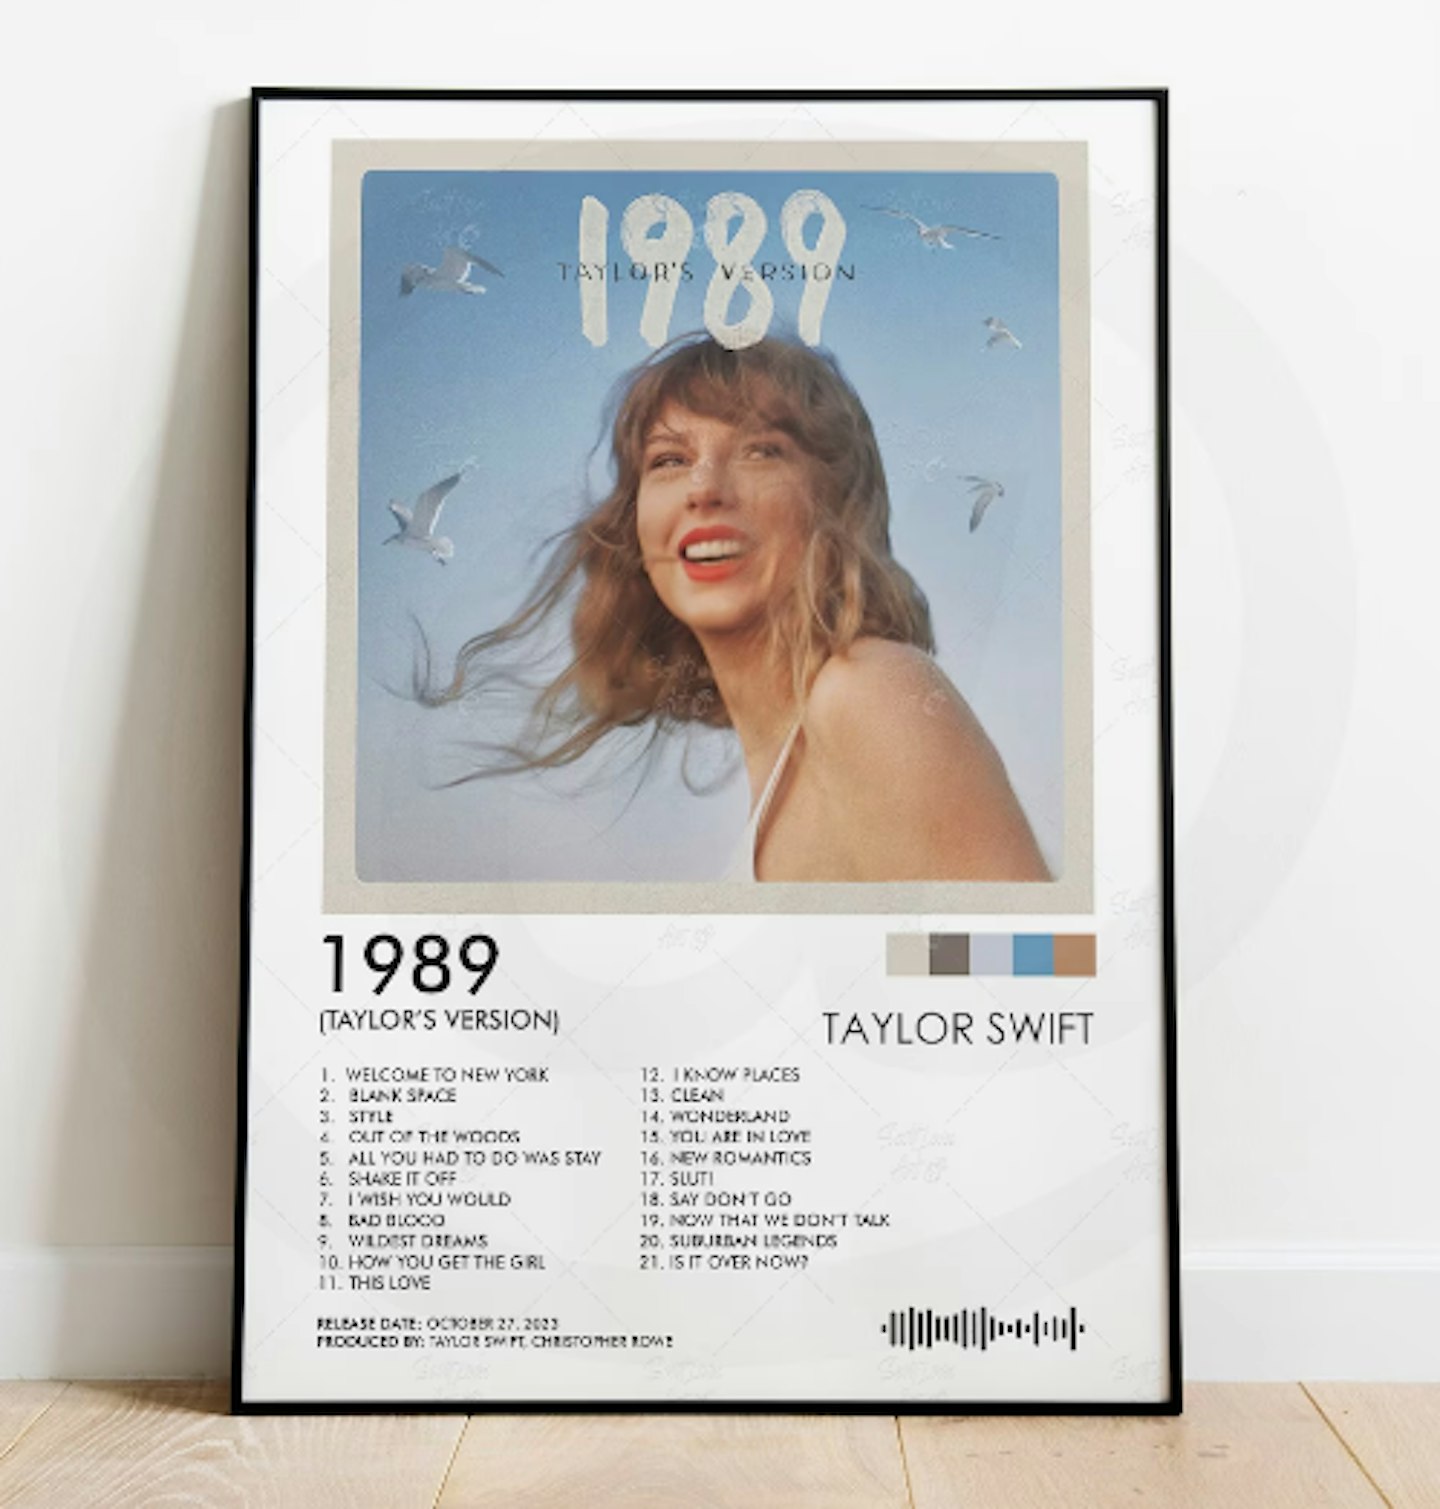 1989 Taylor's Version Poster